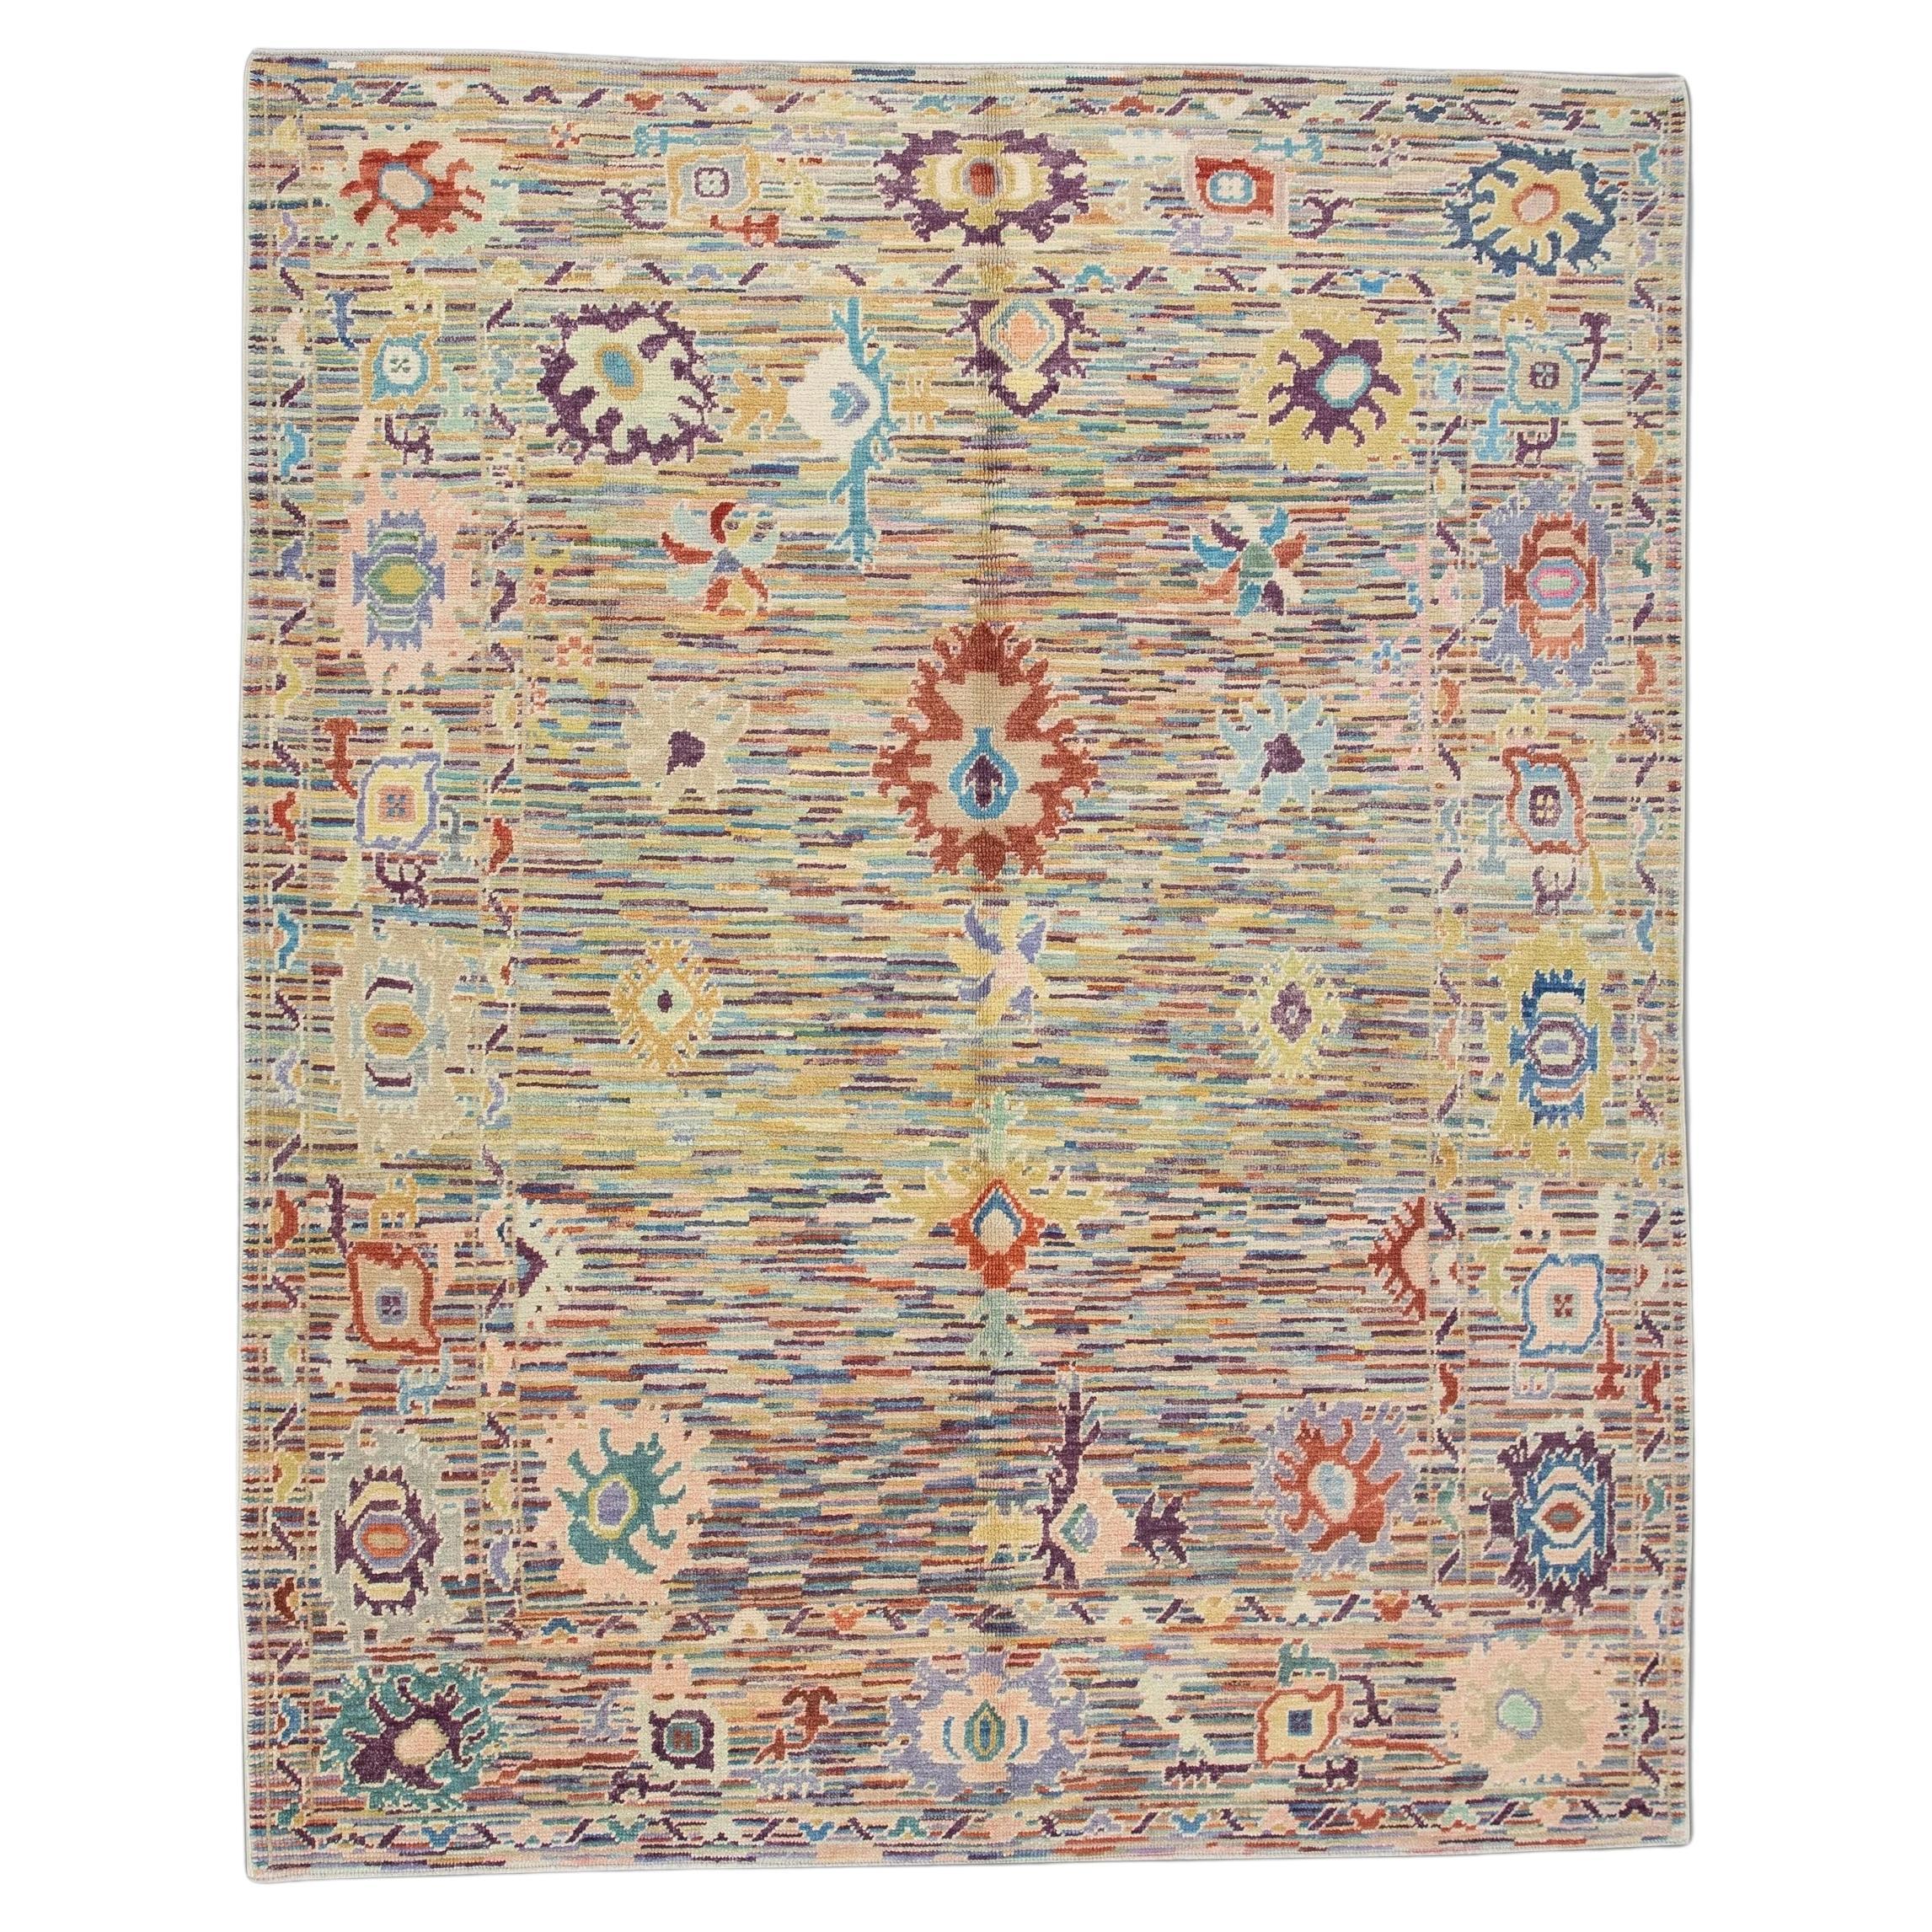 Handwoven Wool Turkish Oushak Rug in Colorful Geometric Floral Design 8' x 10'1" For Sale